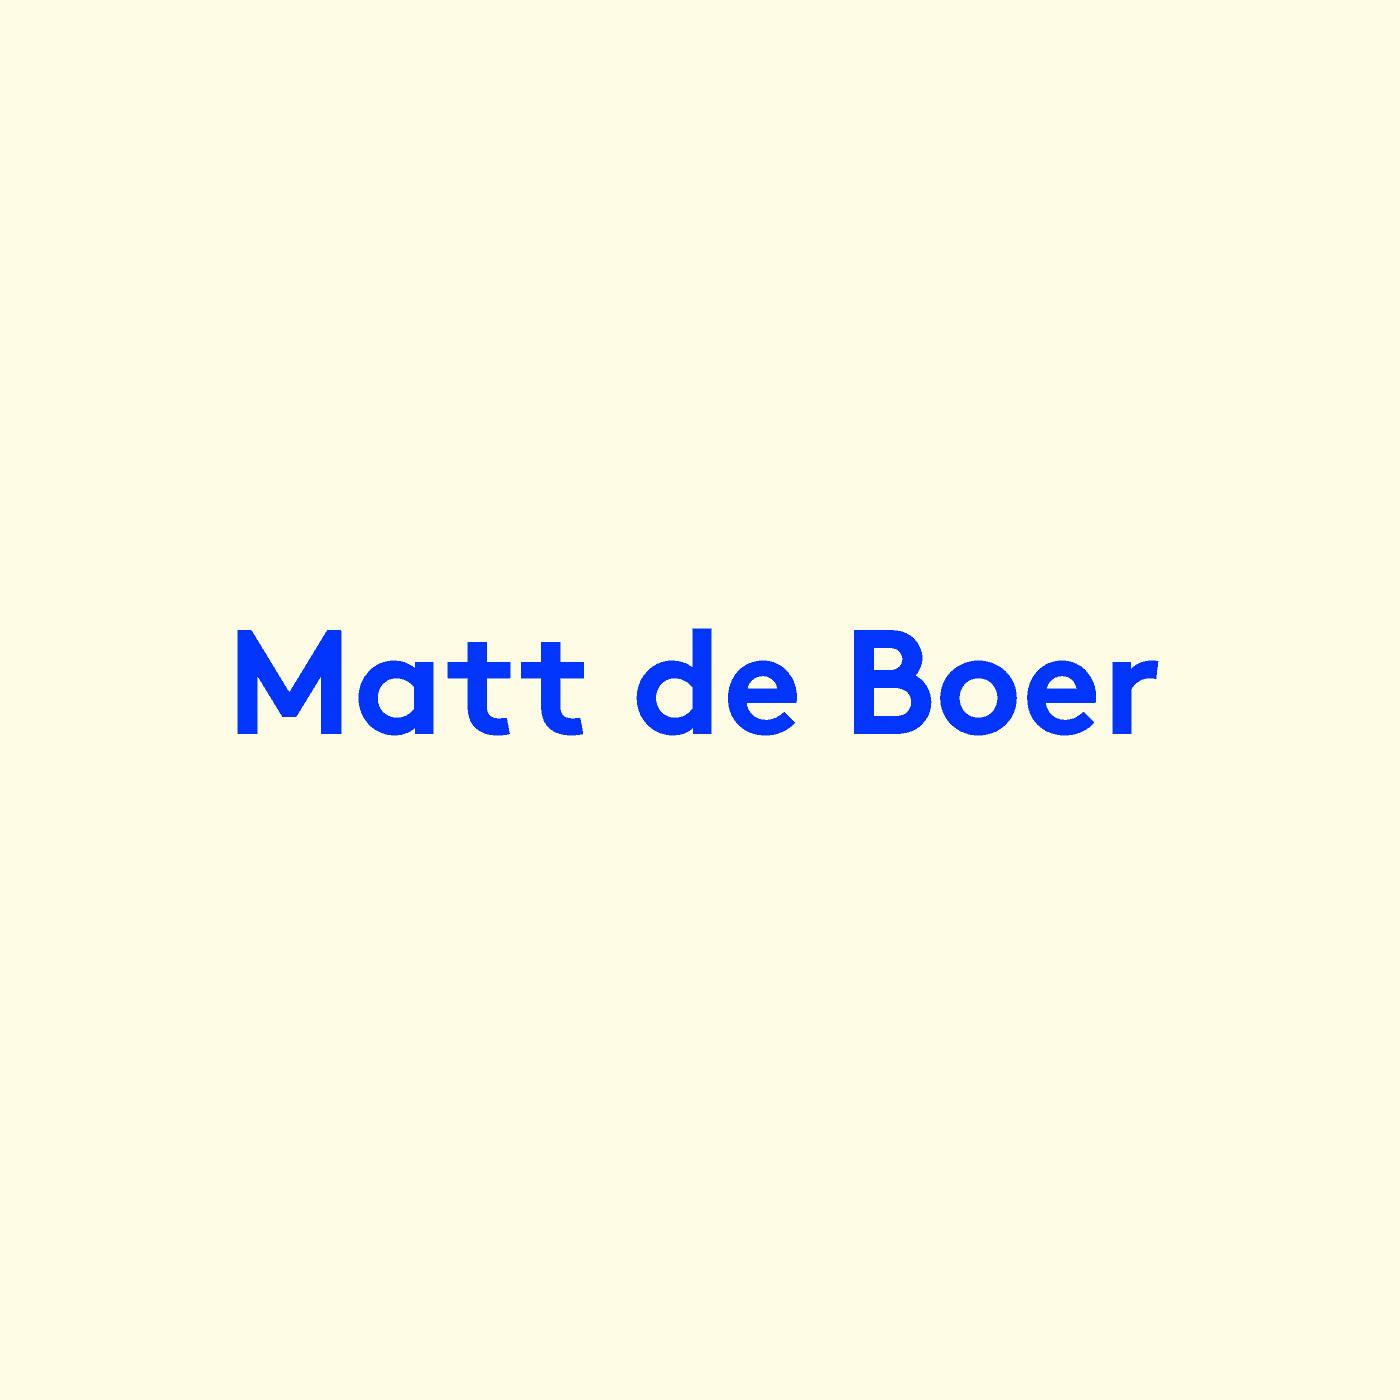 He stole my wallet and I put him in prison for 18 months from episode #96 with Matt de Boer